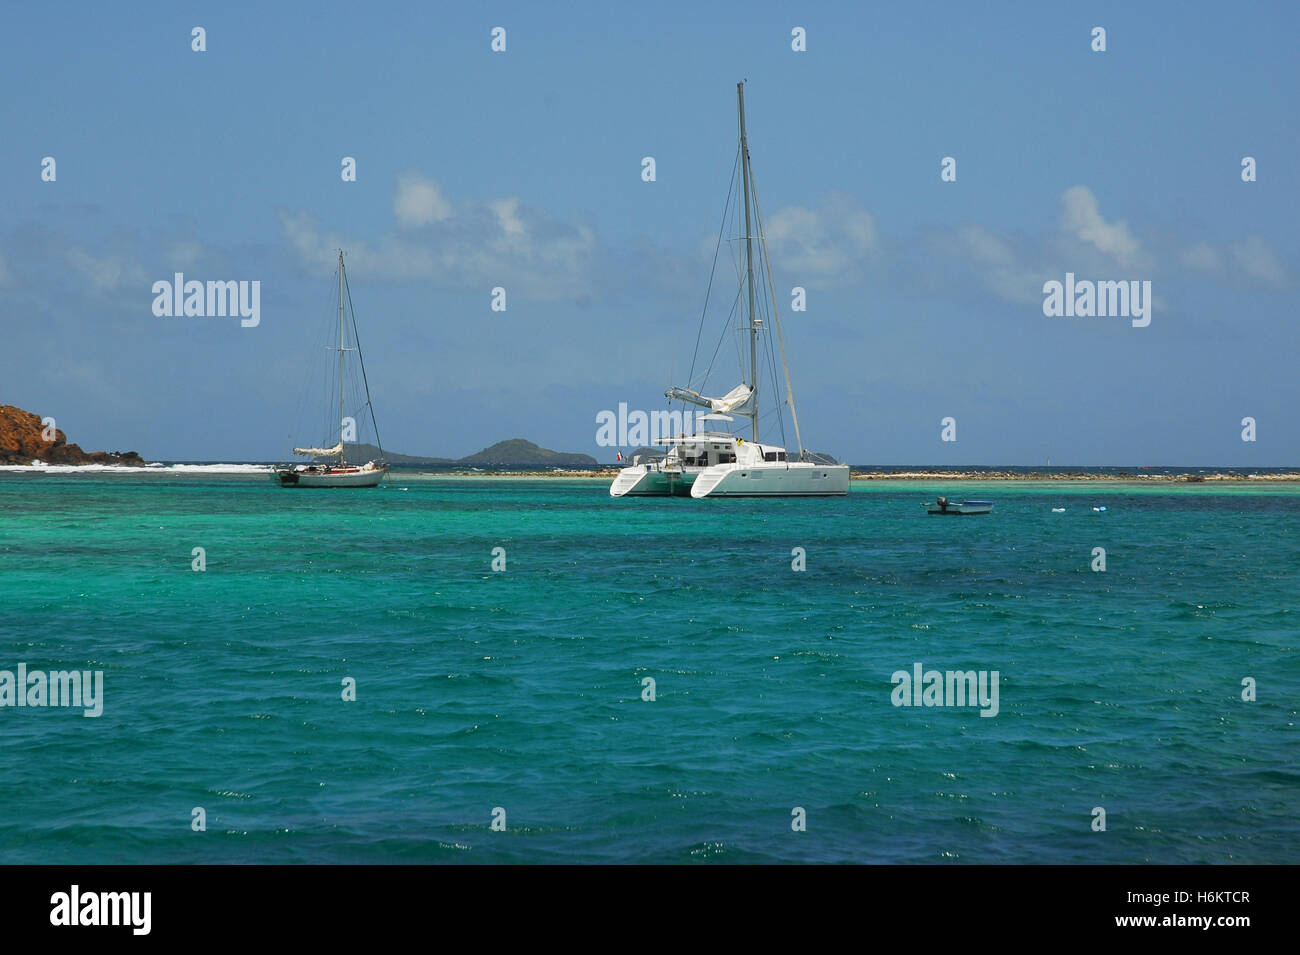 Caribbean, St Vincent and the Grenadines, Union Island, Clifton, Anchorage Stock Photo